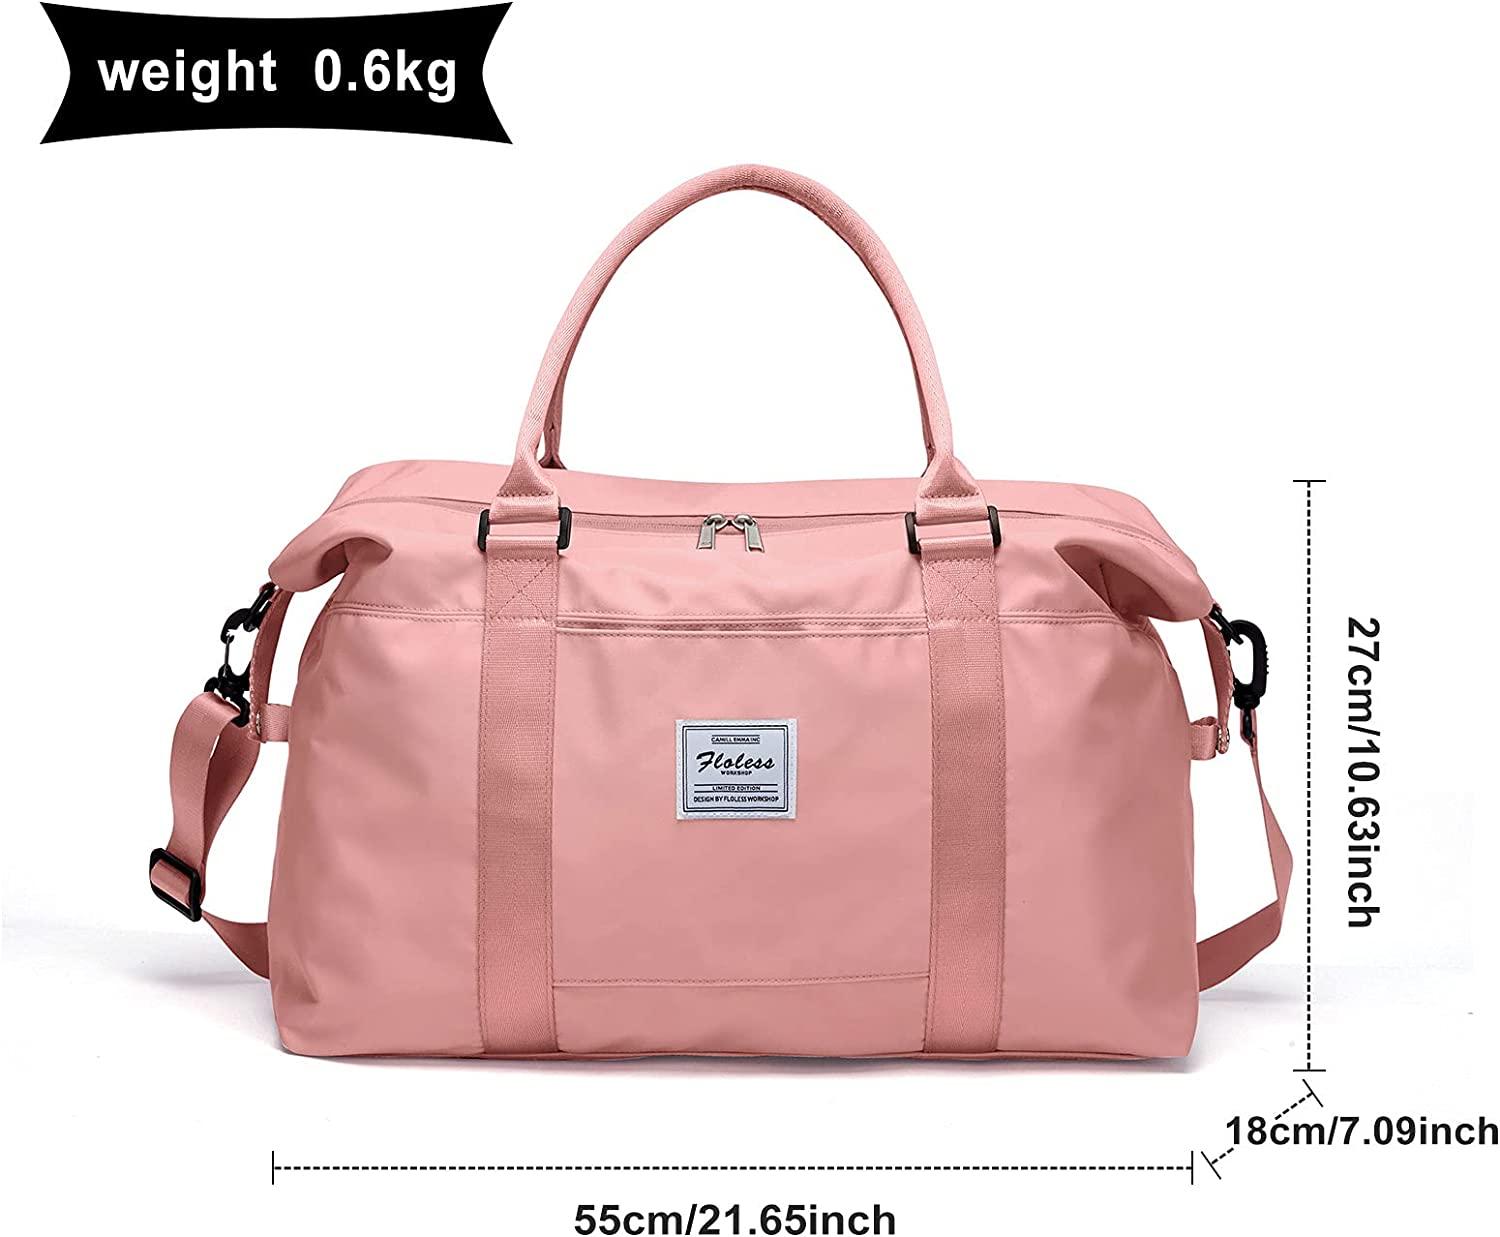 Wholesale Promotional Large Travel Luggage Cheap Price Duffle Bag Women's  Duffle Gym bags for man and women From m.